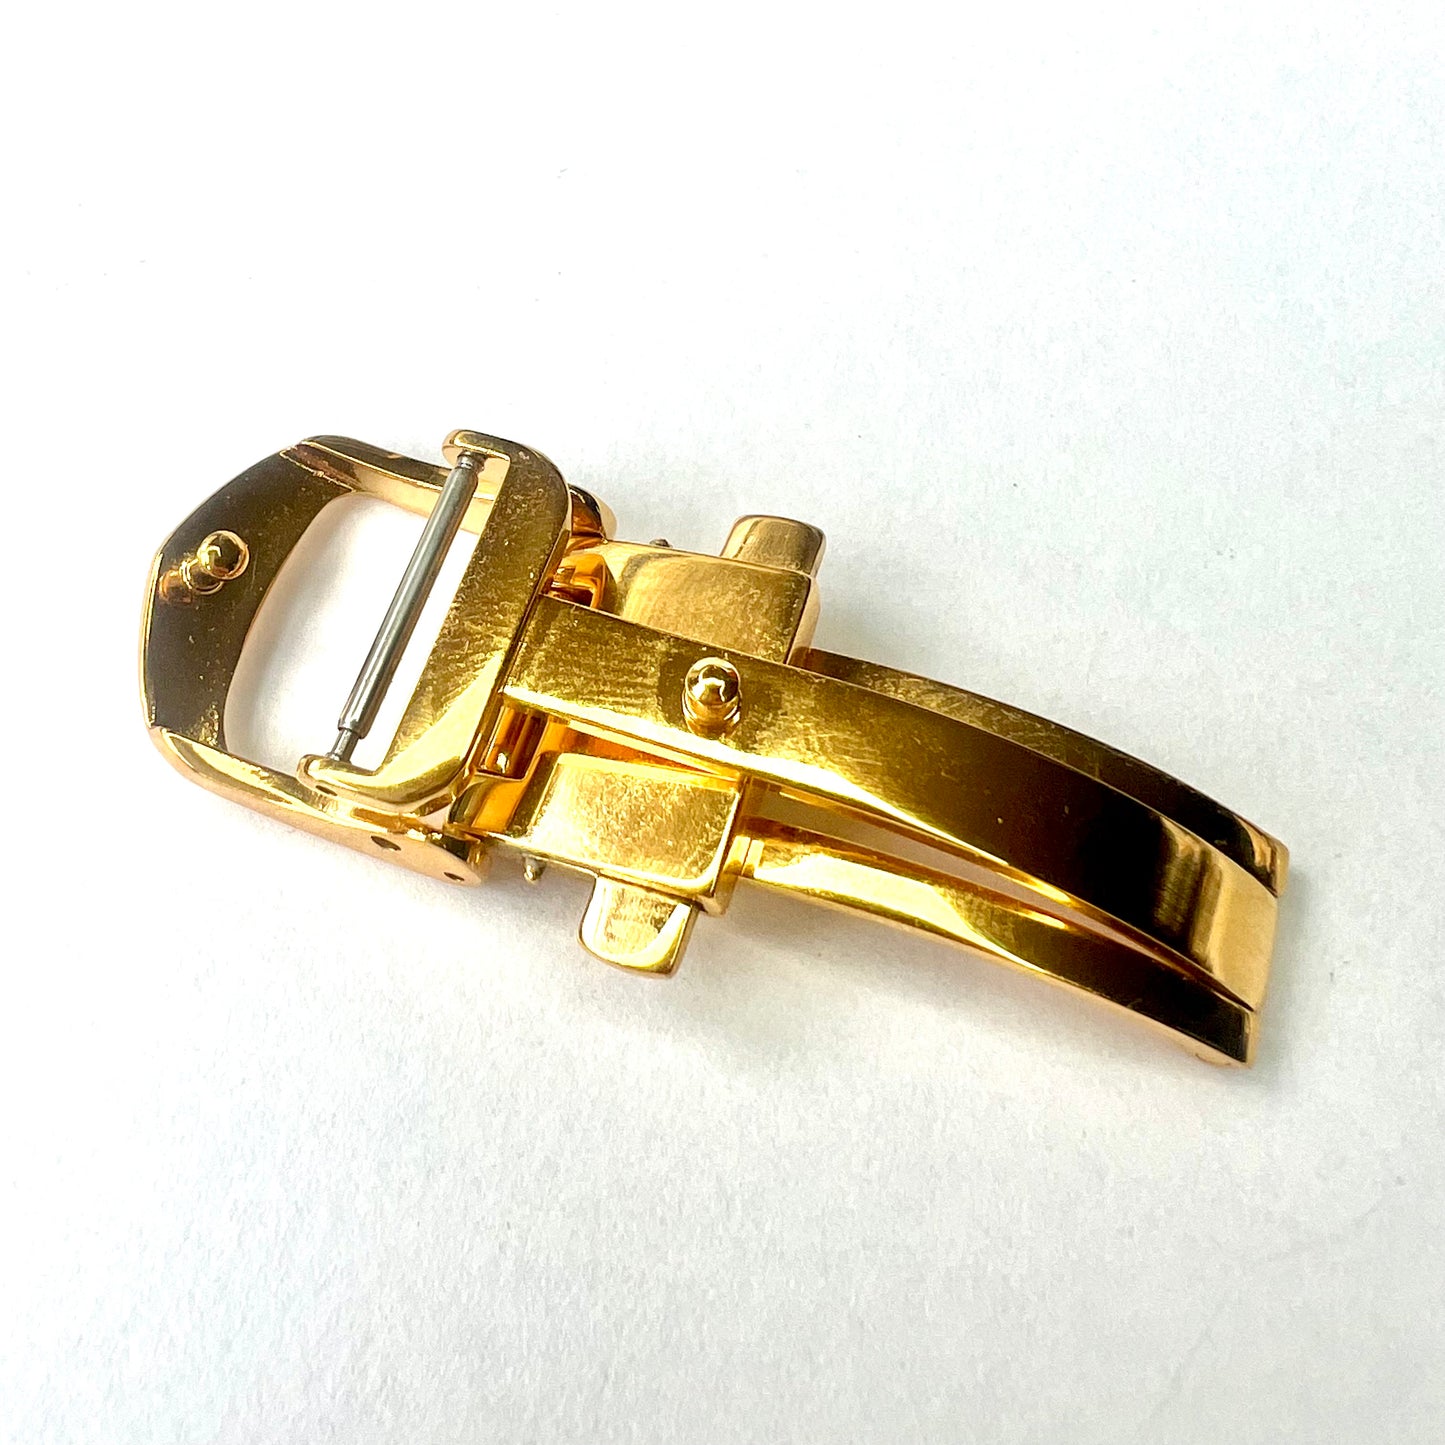 BAMBI 14mm GoldPlated Steel Deployment Buckle